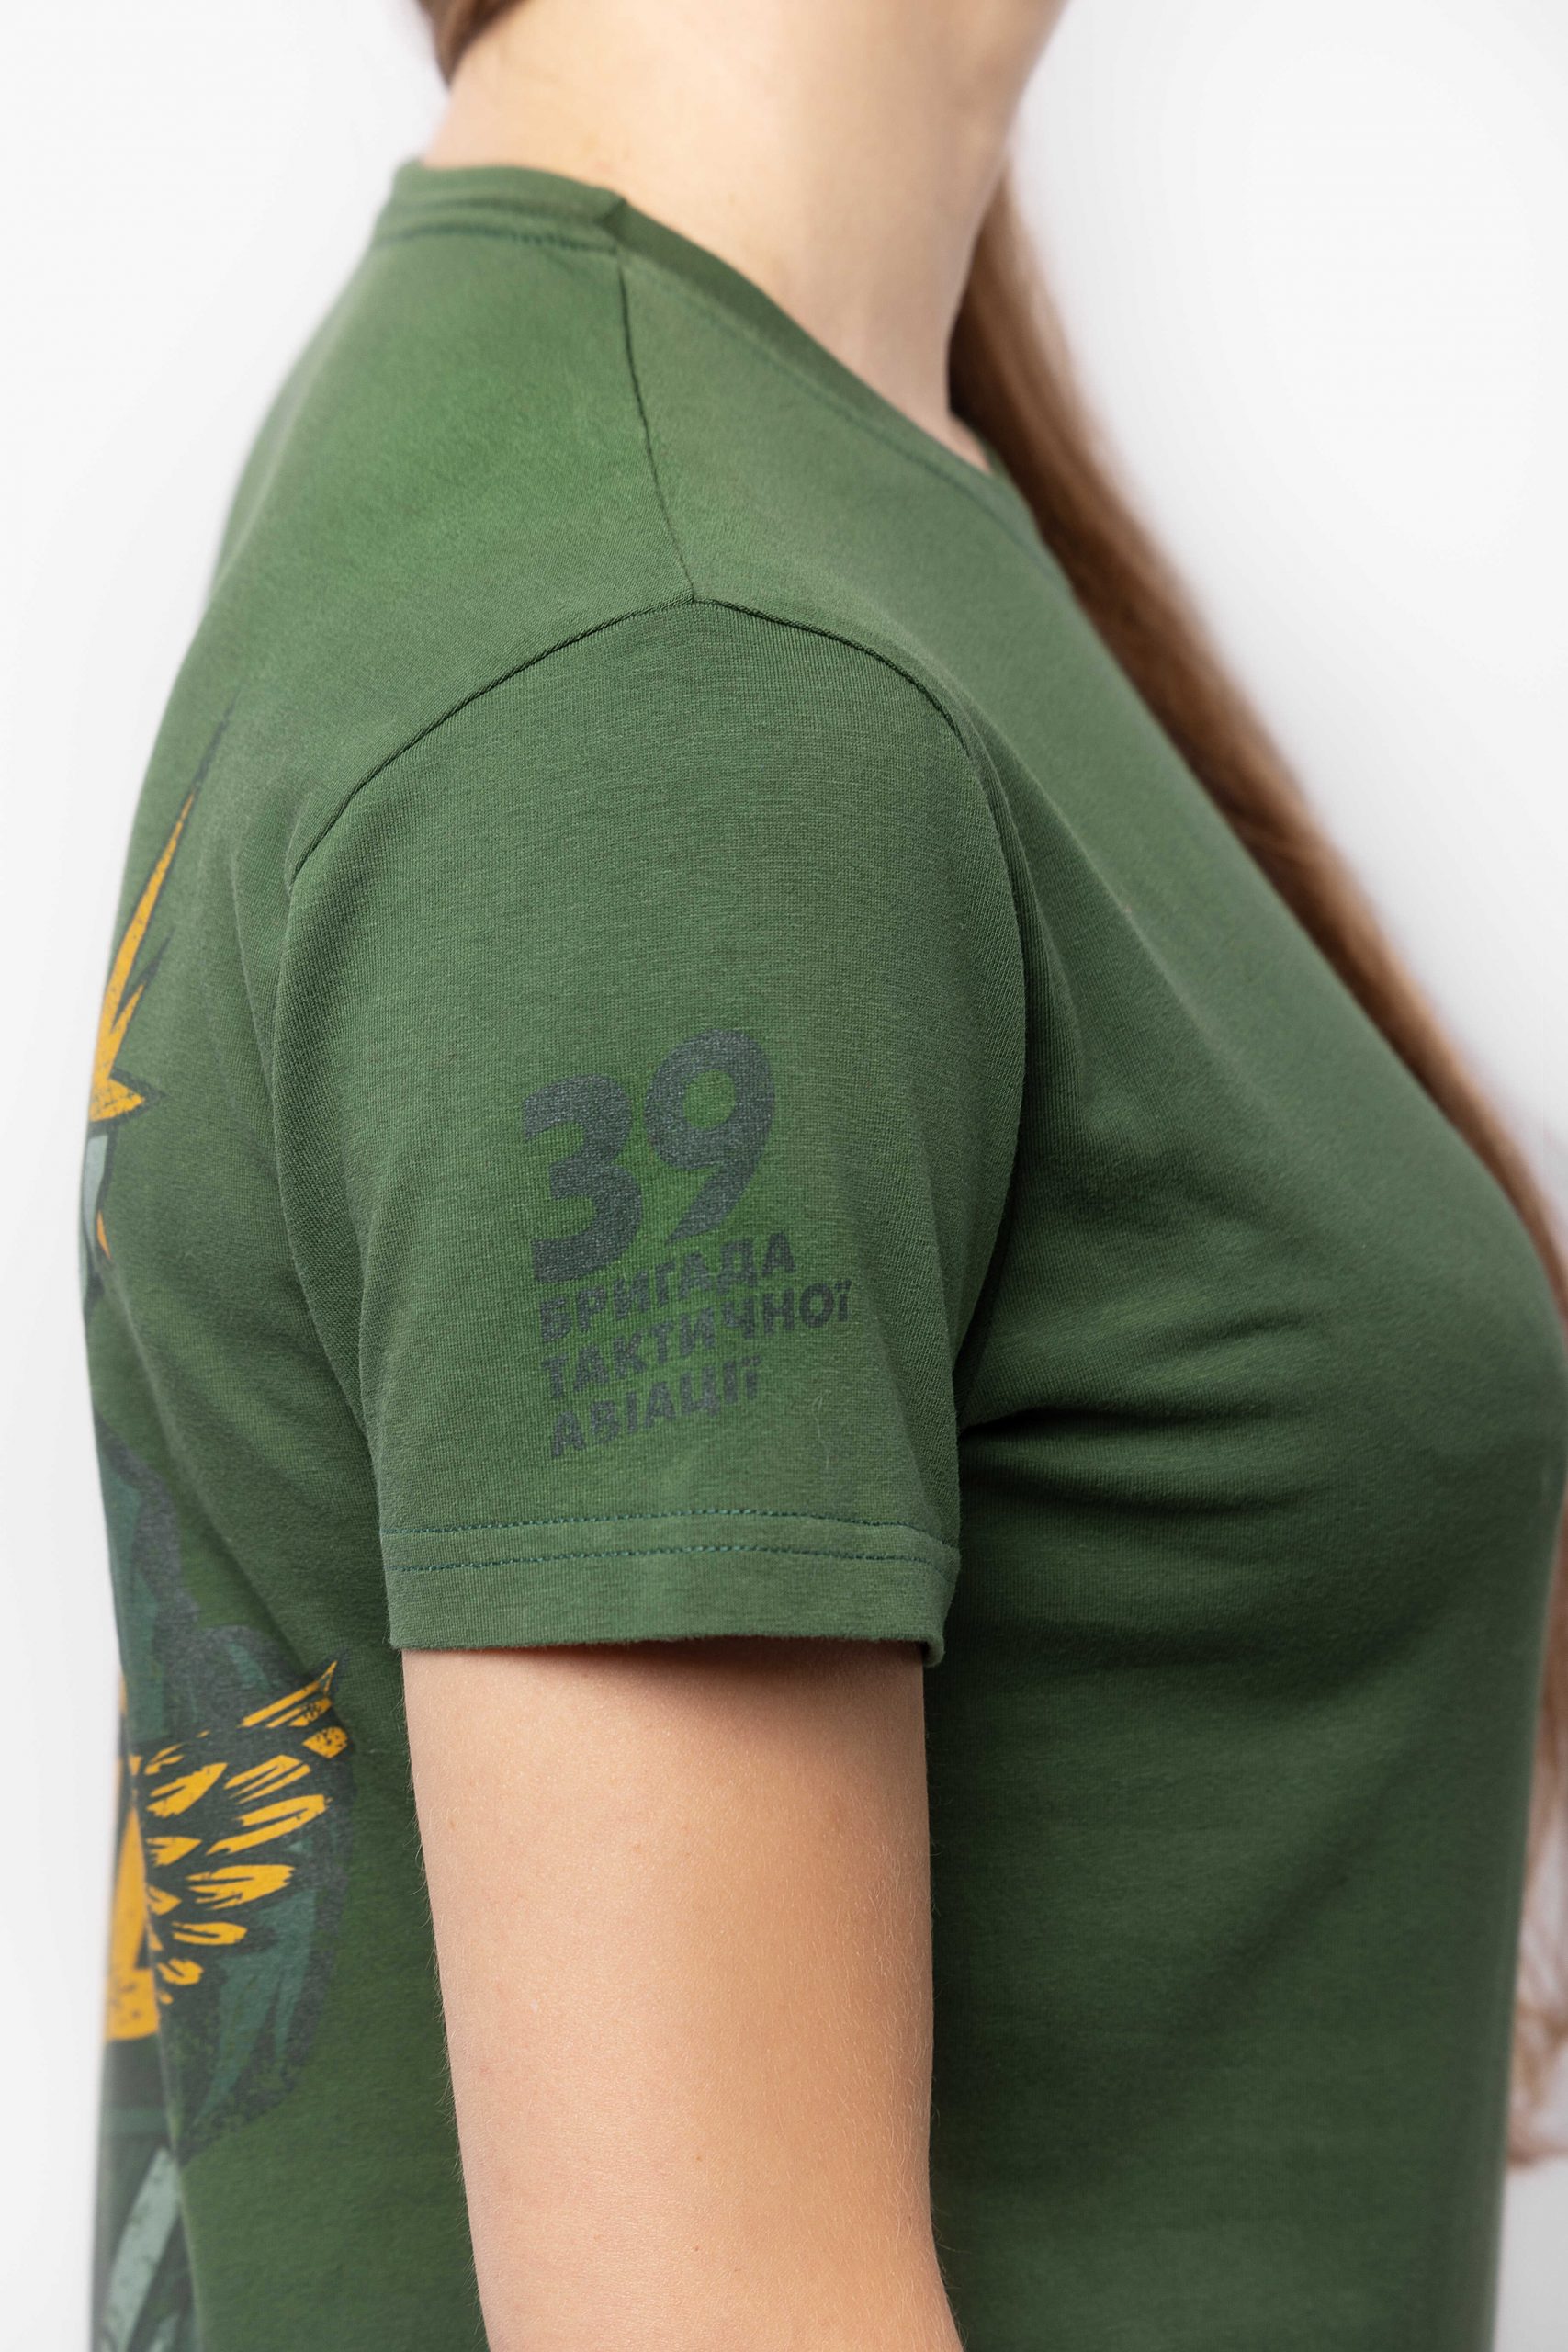 Women's T-Shirt Forest Brothers. Color dark green. 4.